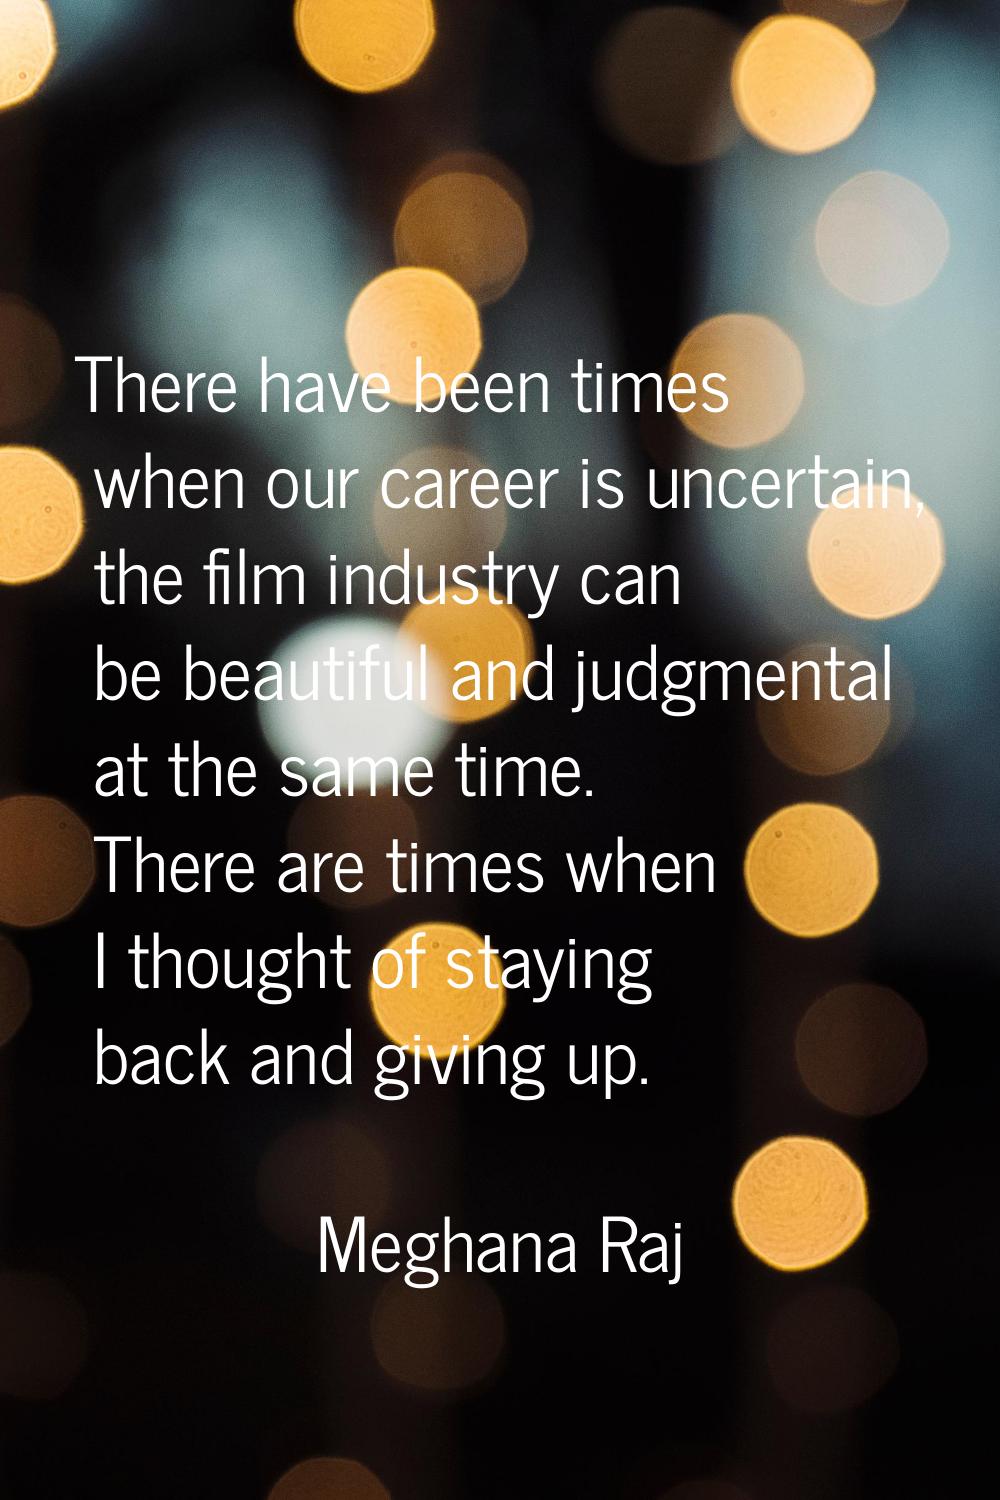 There have been times when our career is uncertain, the film industry can be beautiful and judgment